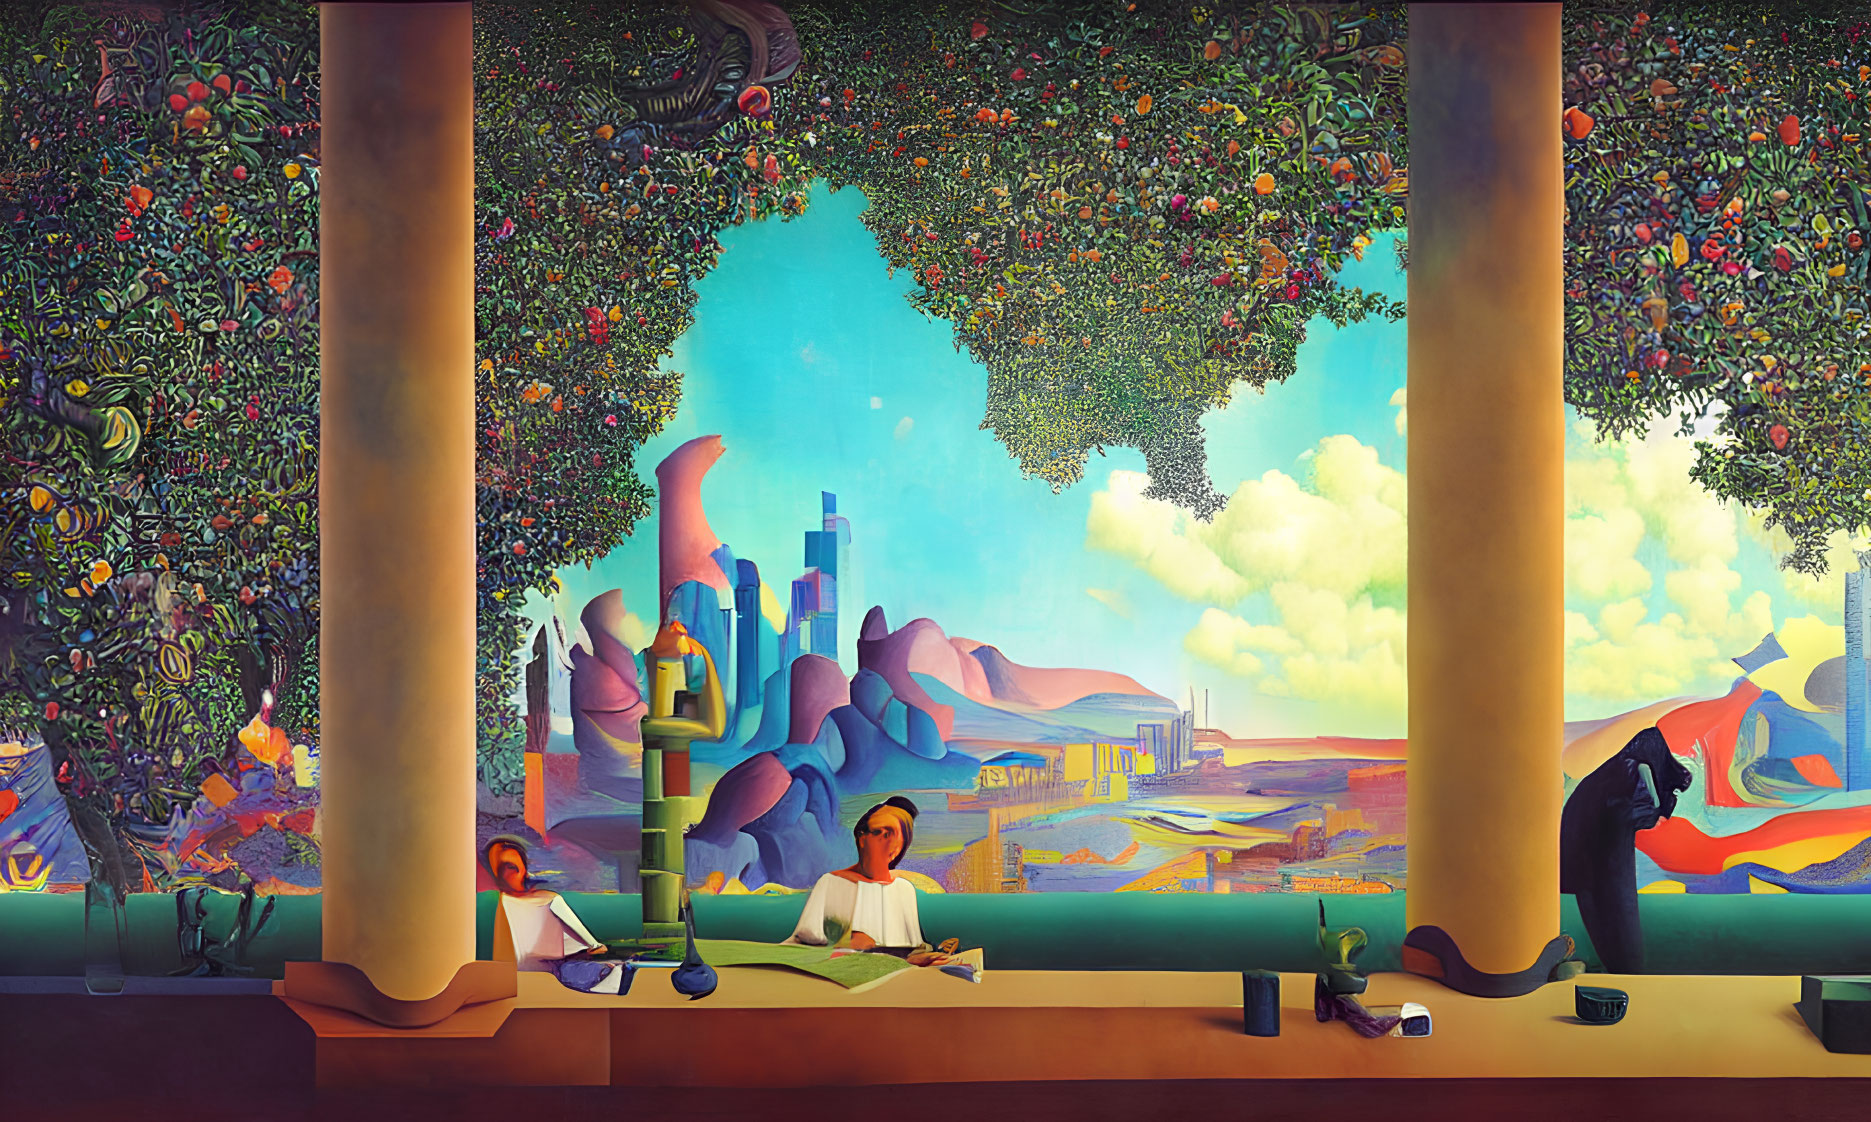 Colorful mural of orchard, cityscape, people at counter, contemplative figure